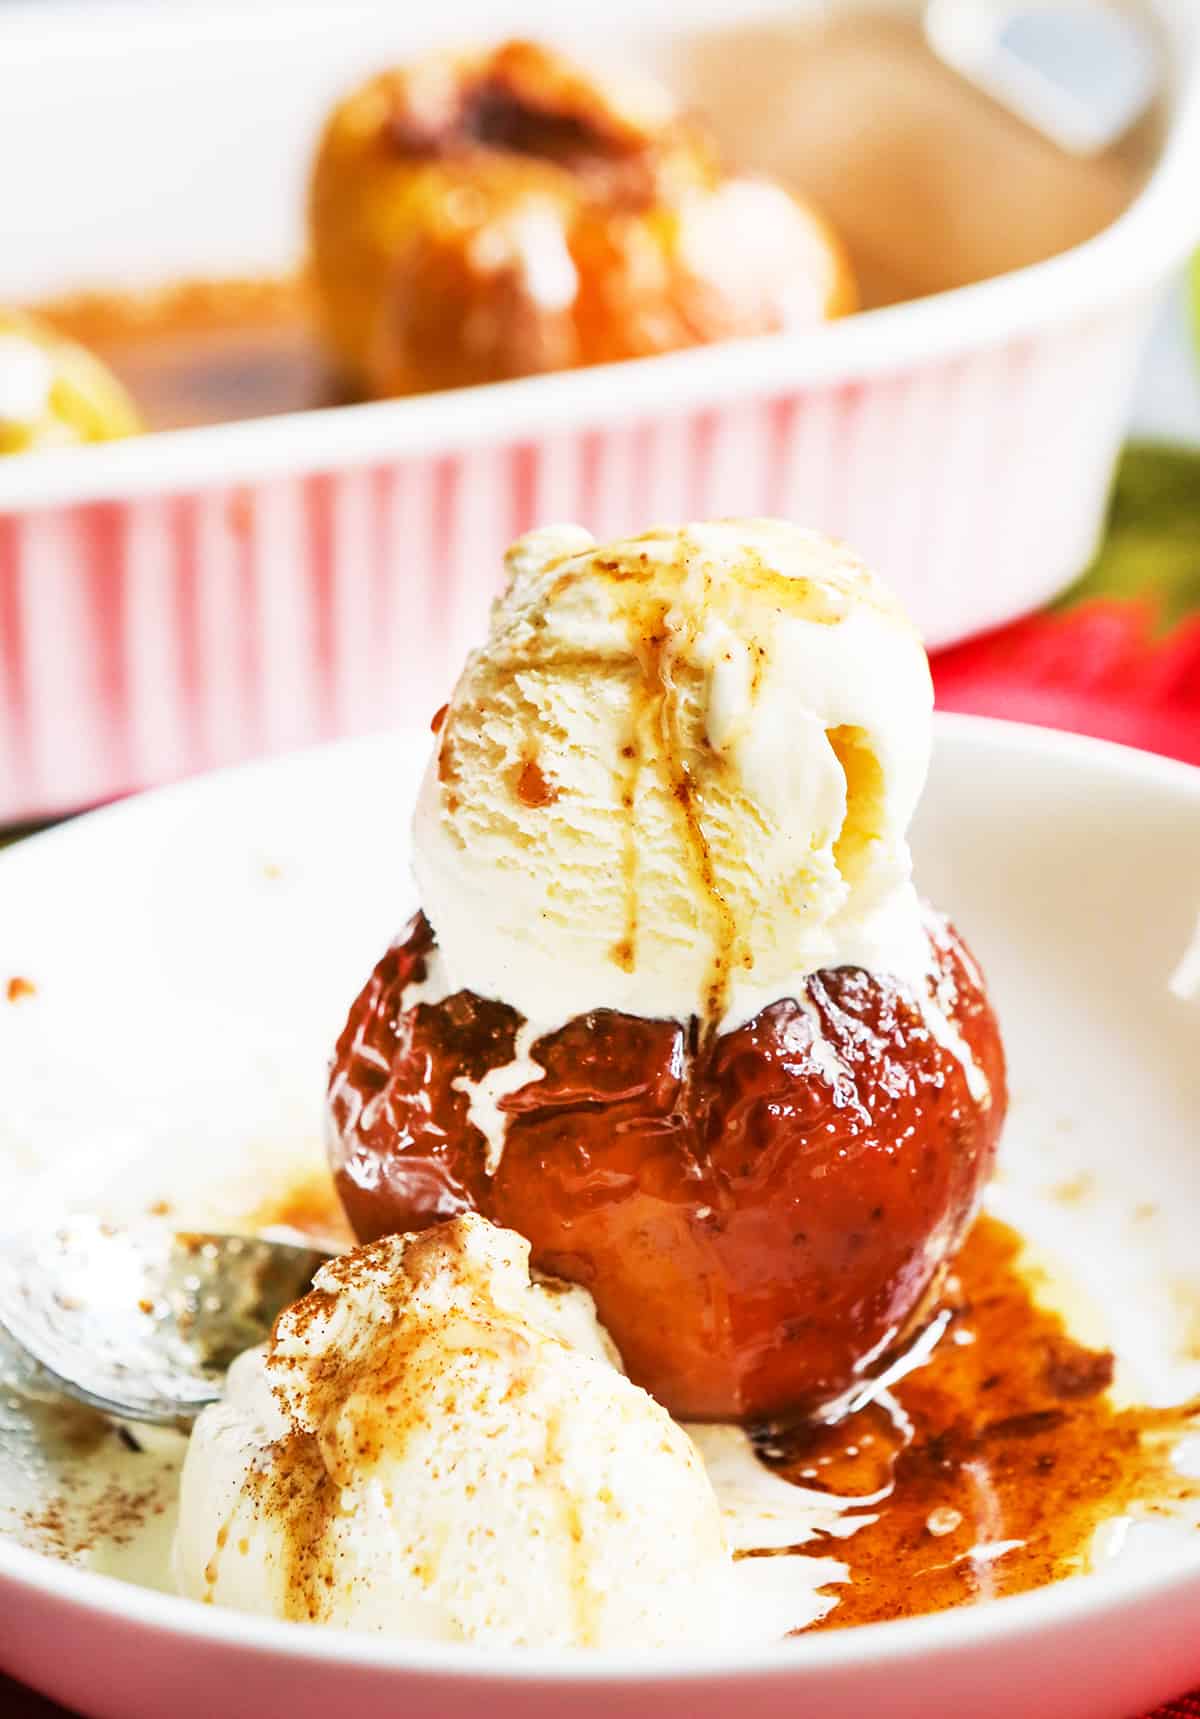 A baked apple served in a bowl with ice cream.